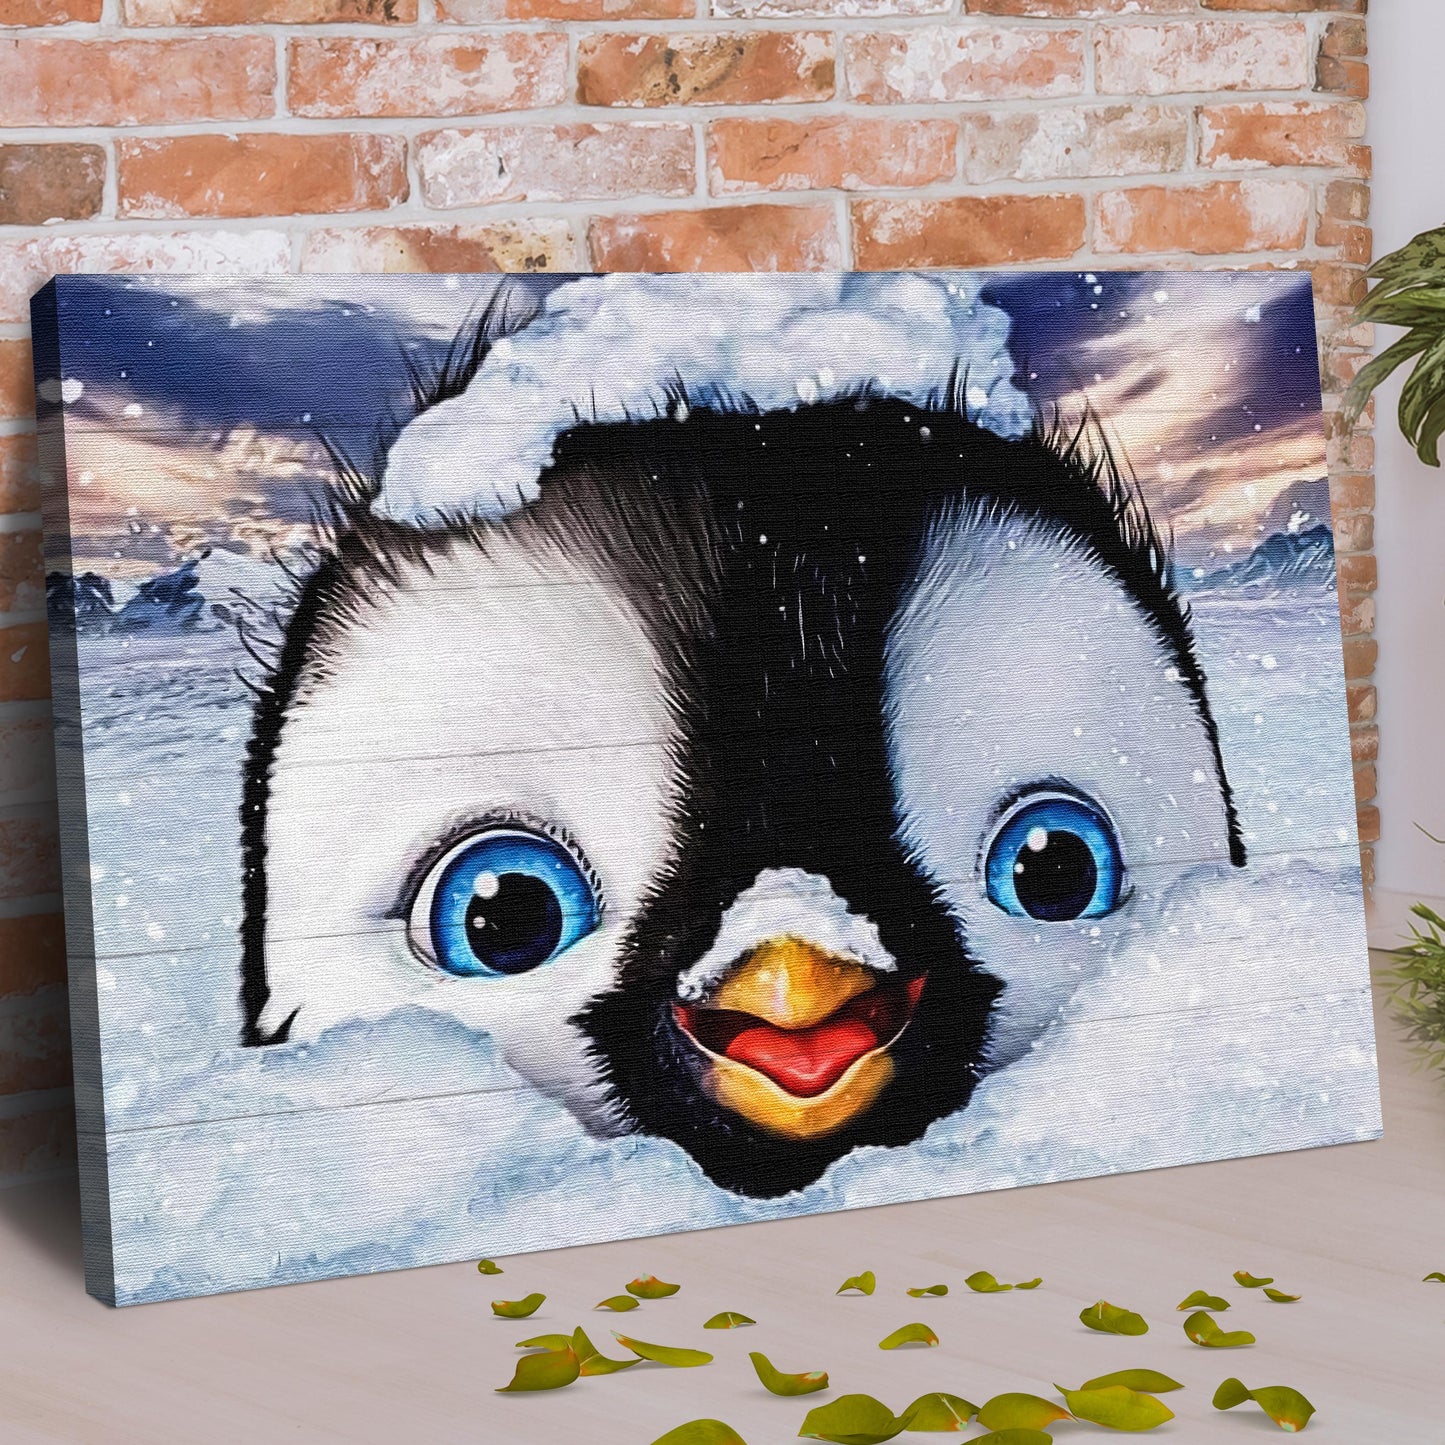 Penguin Peekaboo Painting Wall Art Style 2 - Image by Tailored Canvases